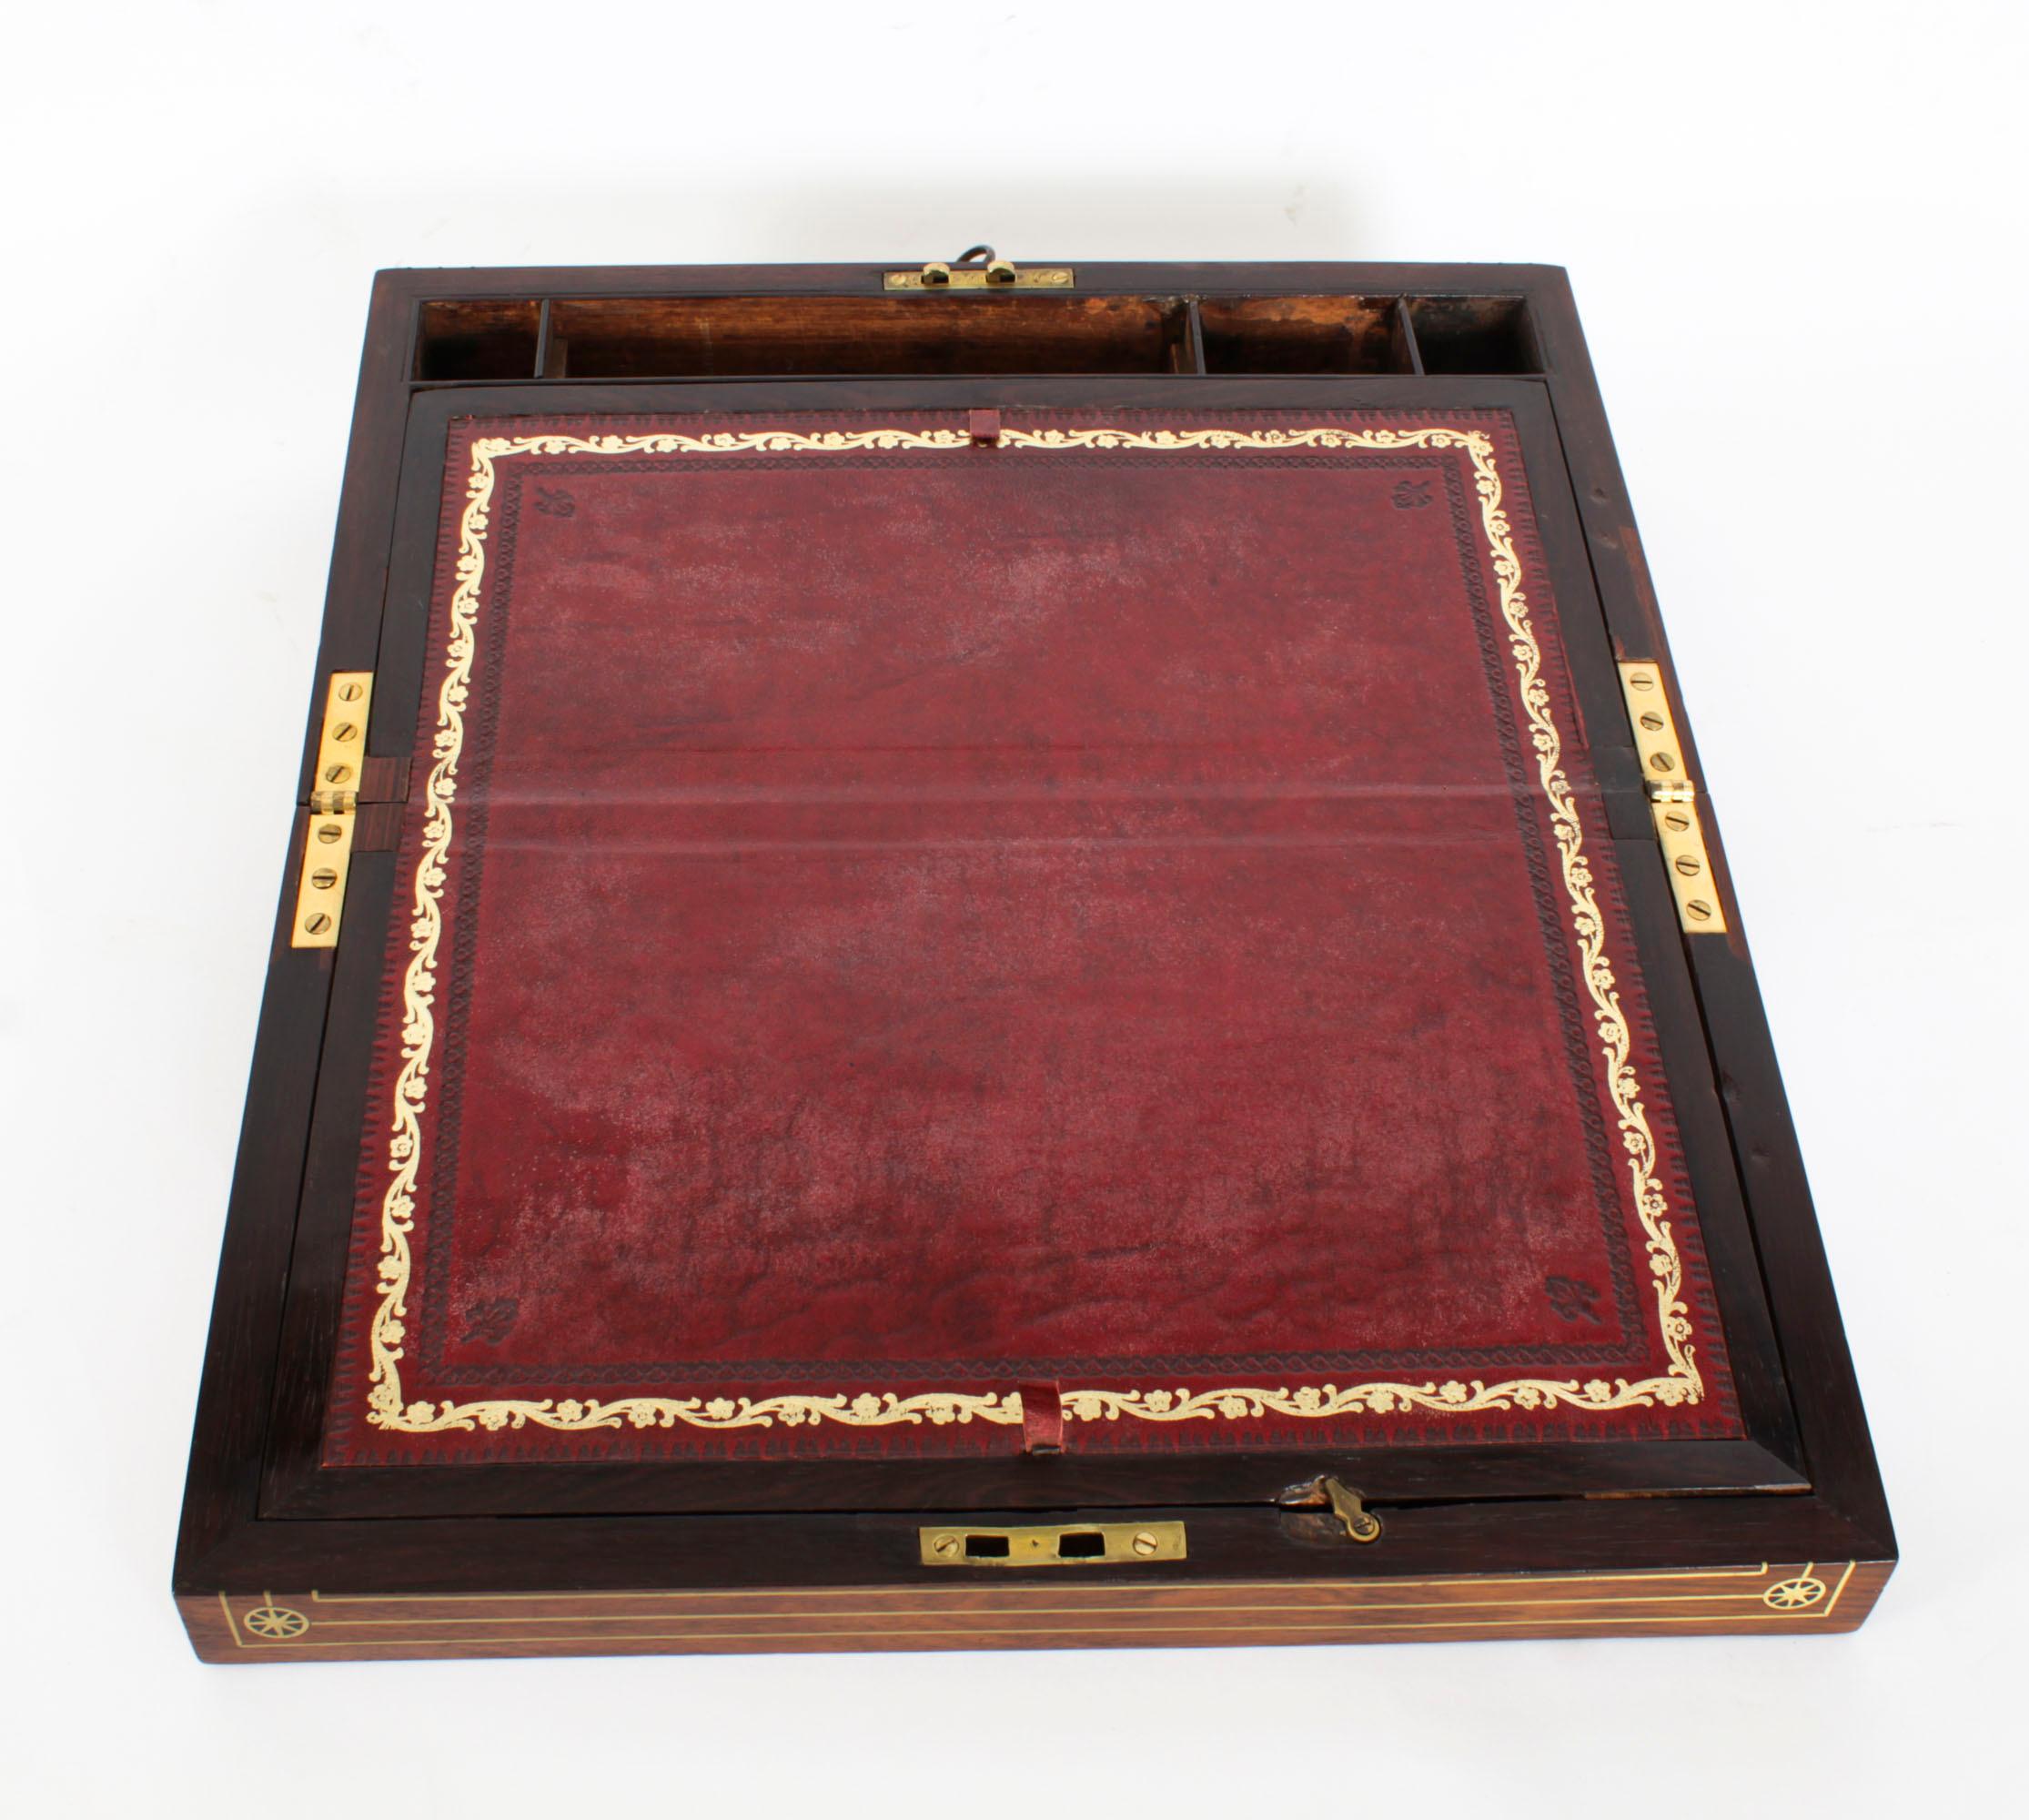 An elegant Regency brass mounted Gonçalo Alves campaign writing slope, circa 1820 in date.

The beautifully polished goncalo alves case has a wonderful age-related patina and a key lockable hinged top with inset brass beading and plaques,